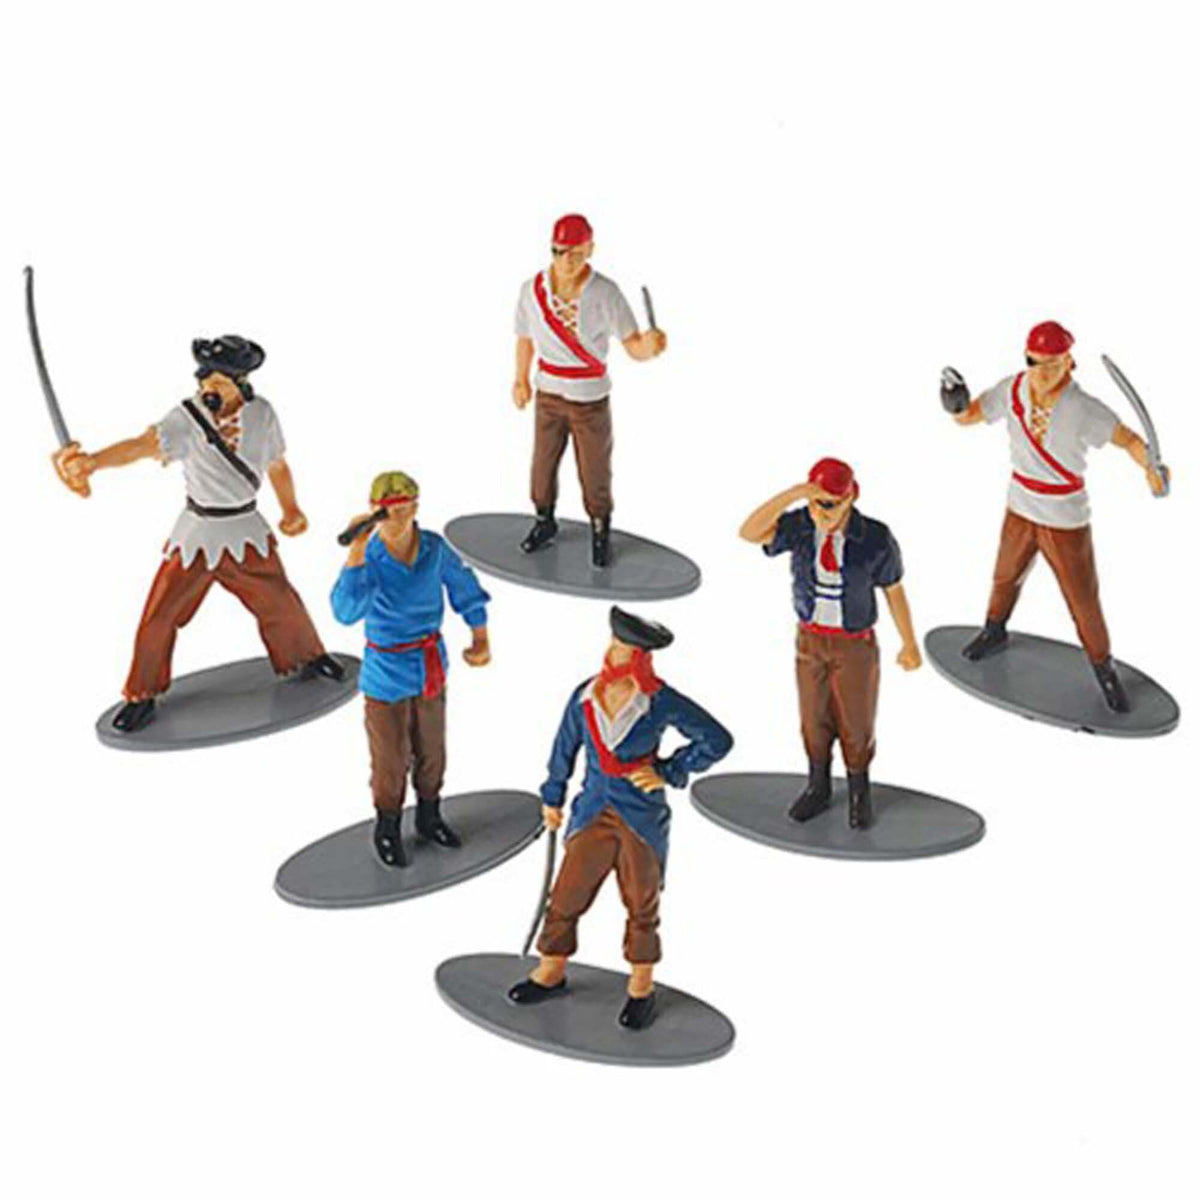 U.S. TOYS Theme Party Pirate Figures, 12 Count